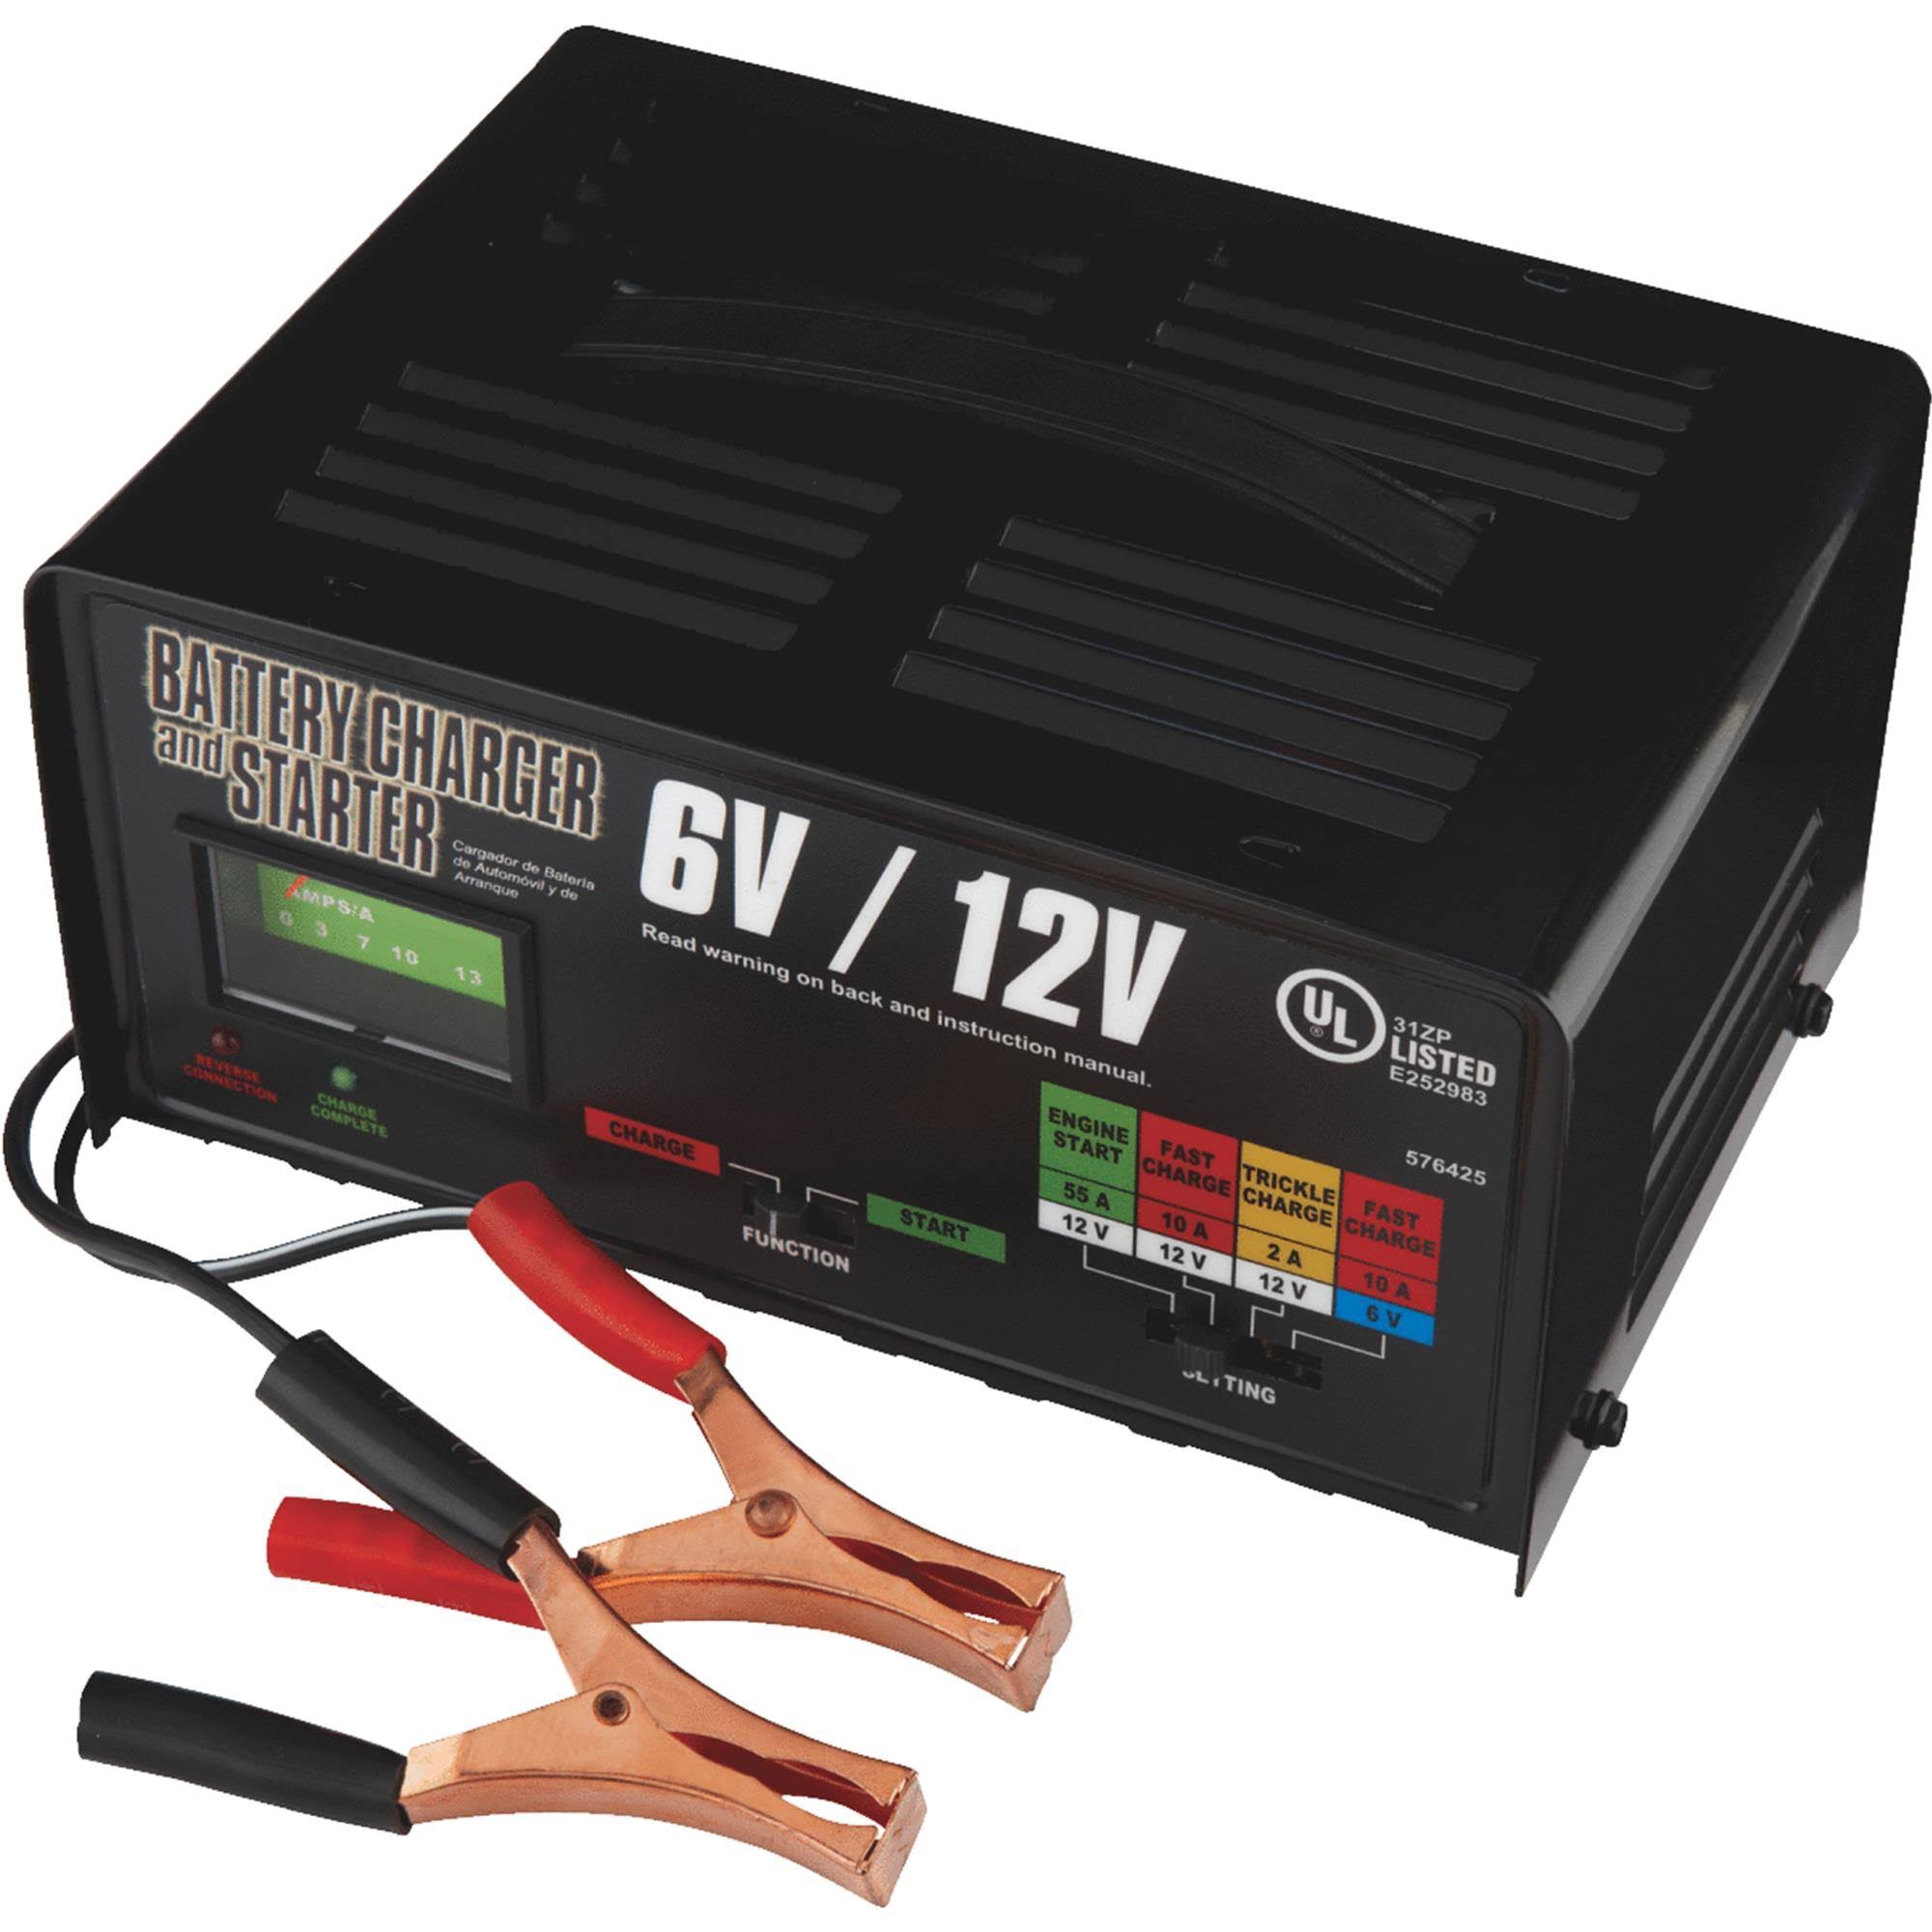 Automatic 6V and 12V 2A/10A/55A Auto Battery Charger 03418